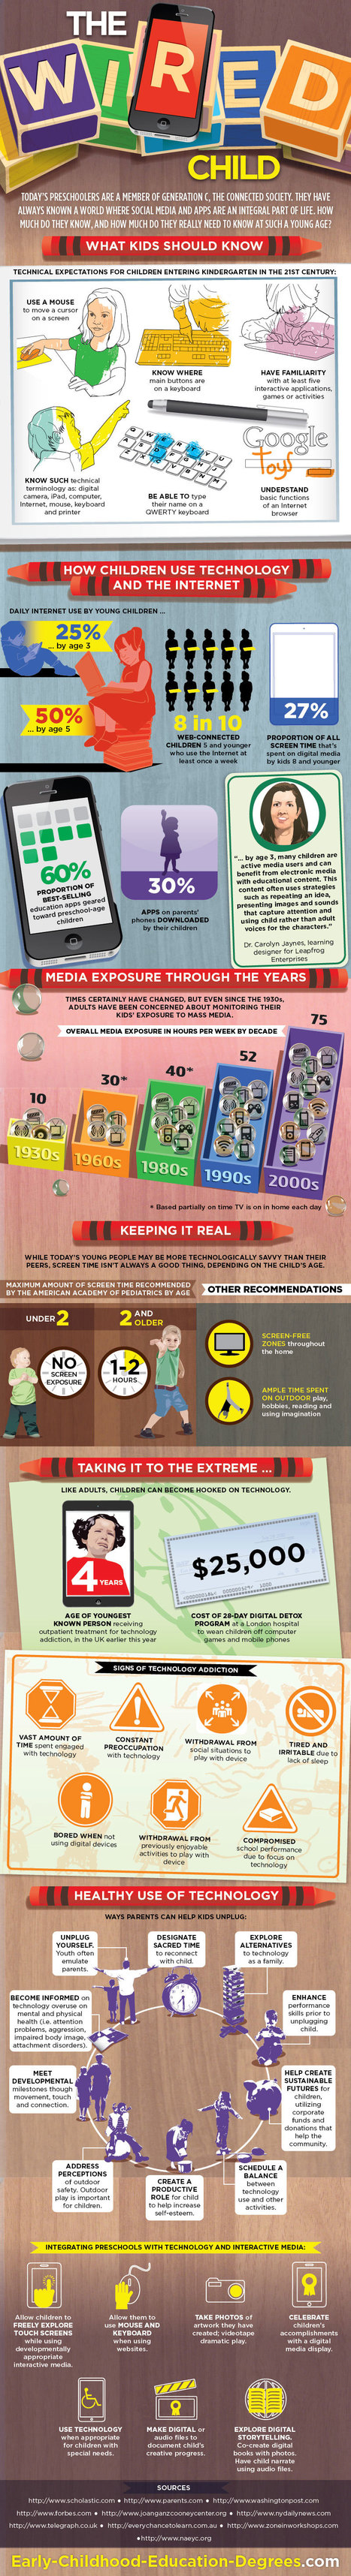 The Complete Visual Guide To Technology For Children [Infographic] | Into the Driver's Seat | Scoop.it